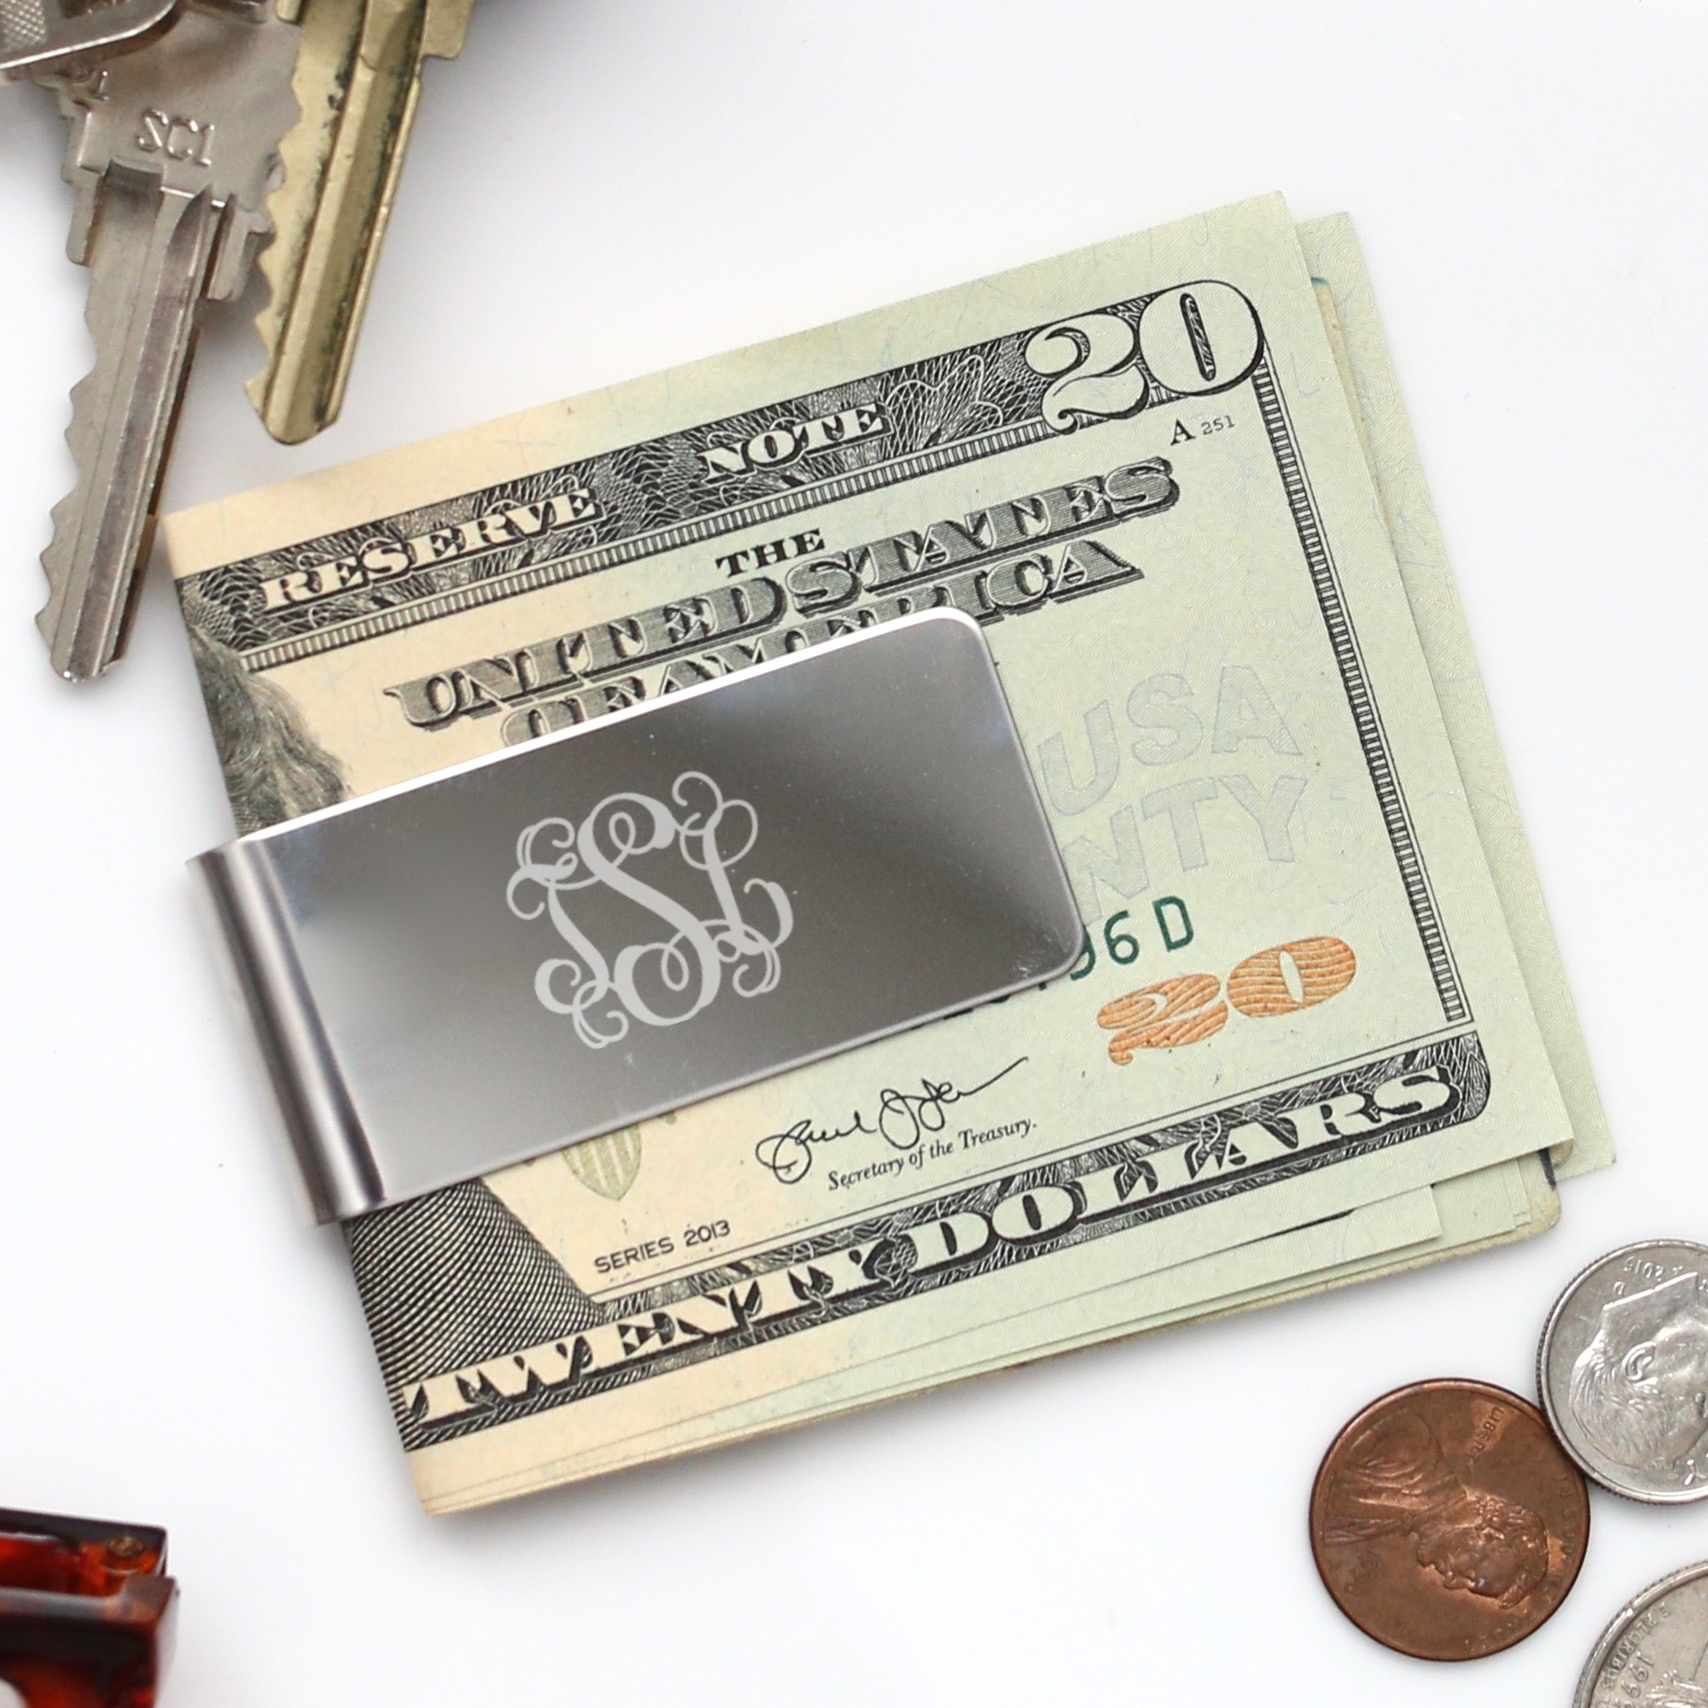 Personalized Green Carbon Fiber Money Clip w/Free Engraving in Diamond  Monogram at  Men's Clothing store